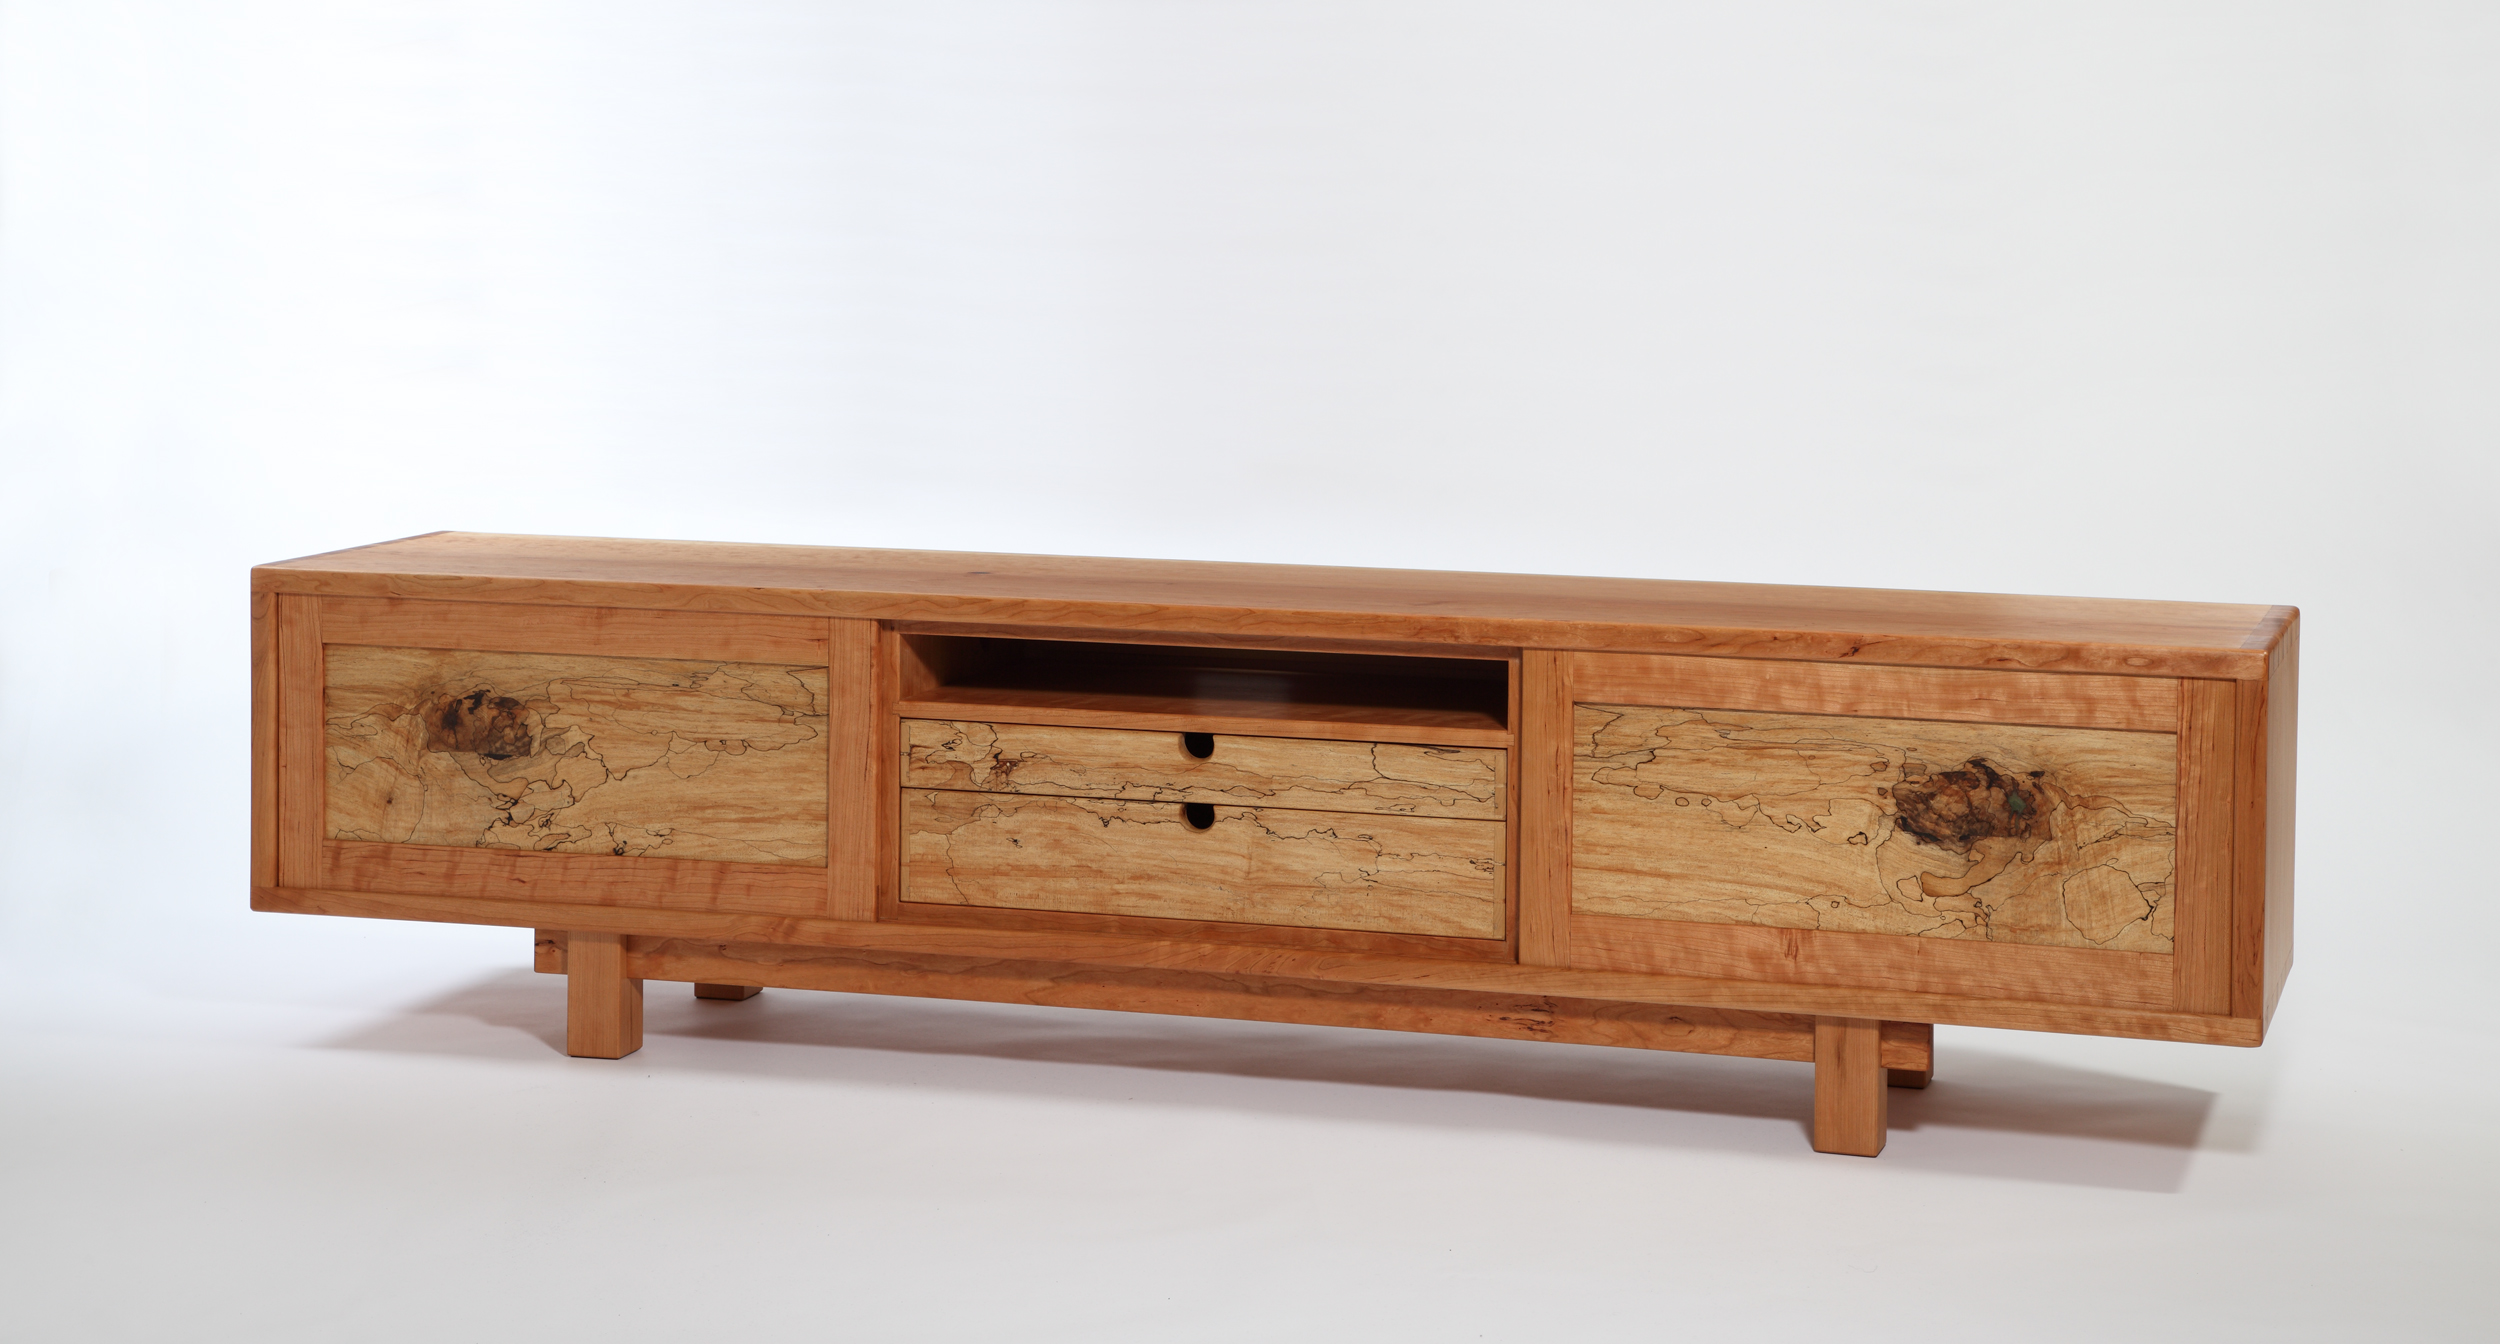 media console in cherry and spalted maple- 92